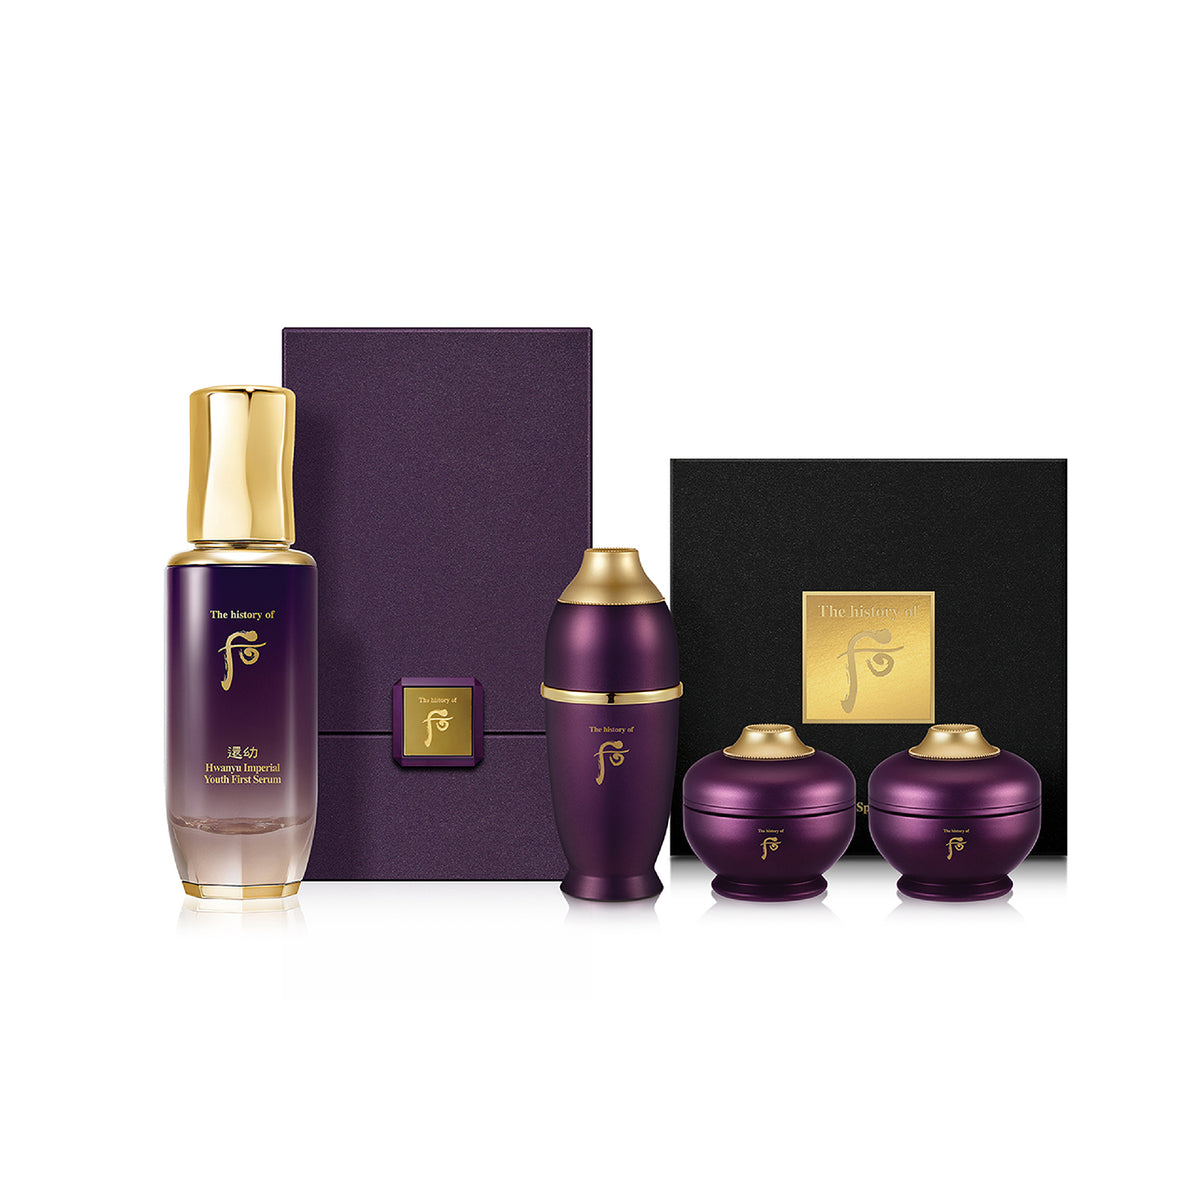 Hwanyu Imperial Youth First Ritual Serum Special Set